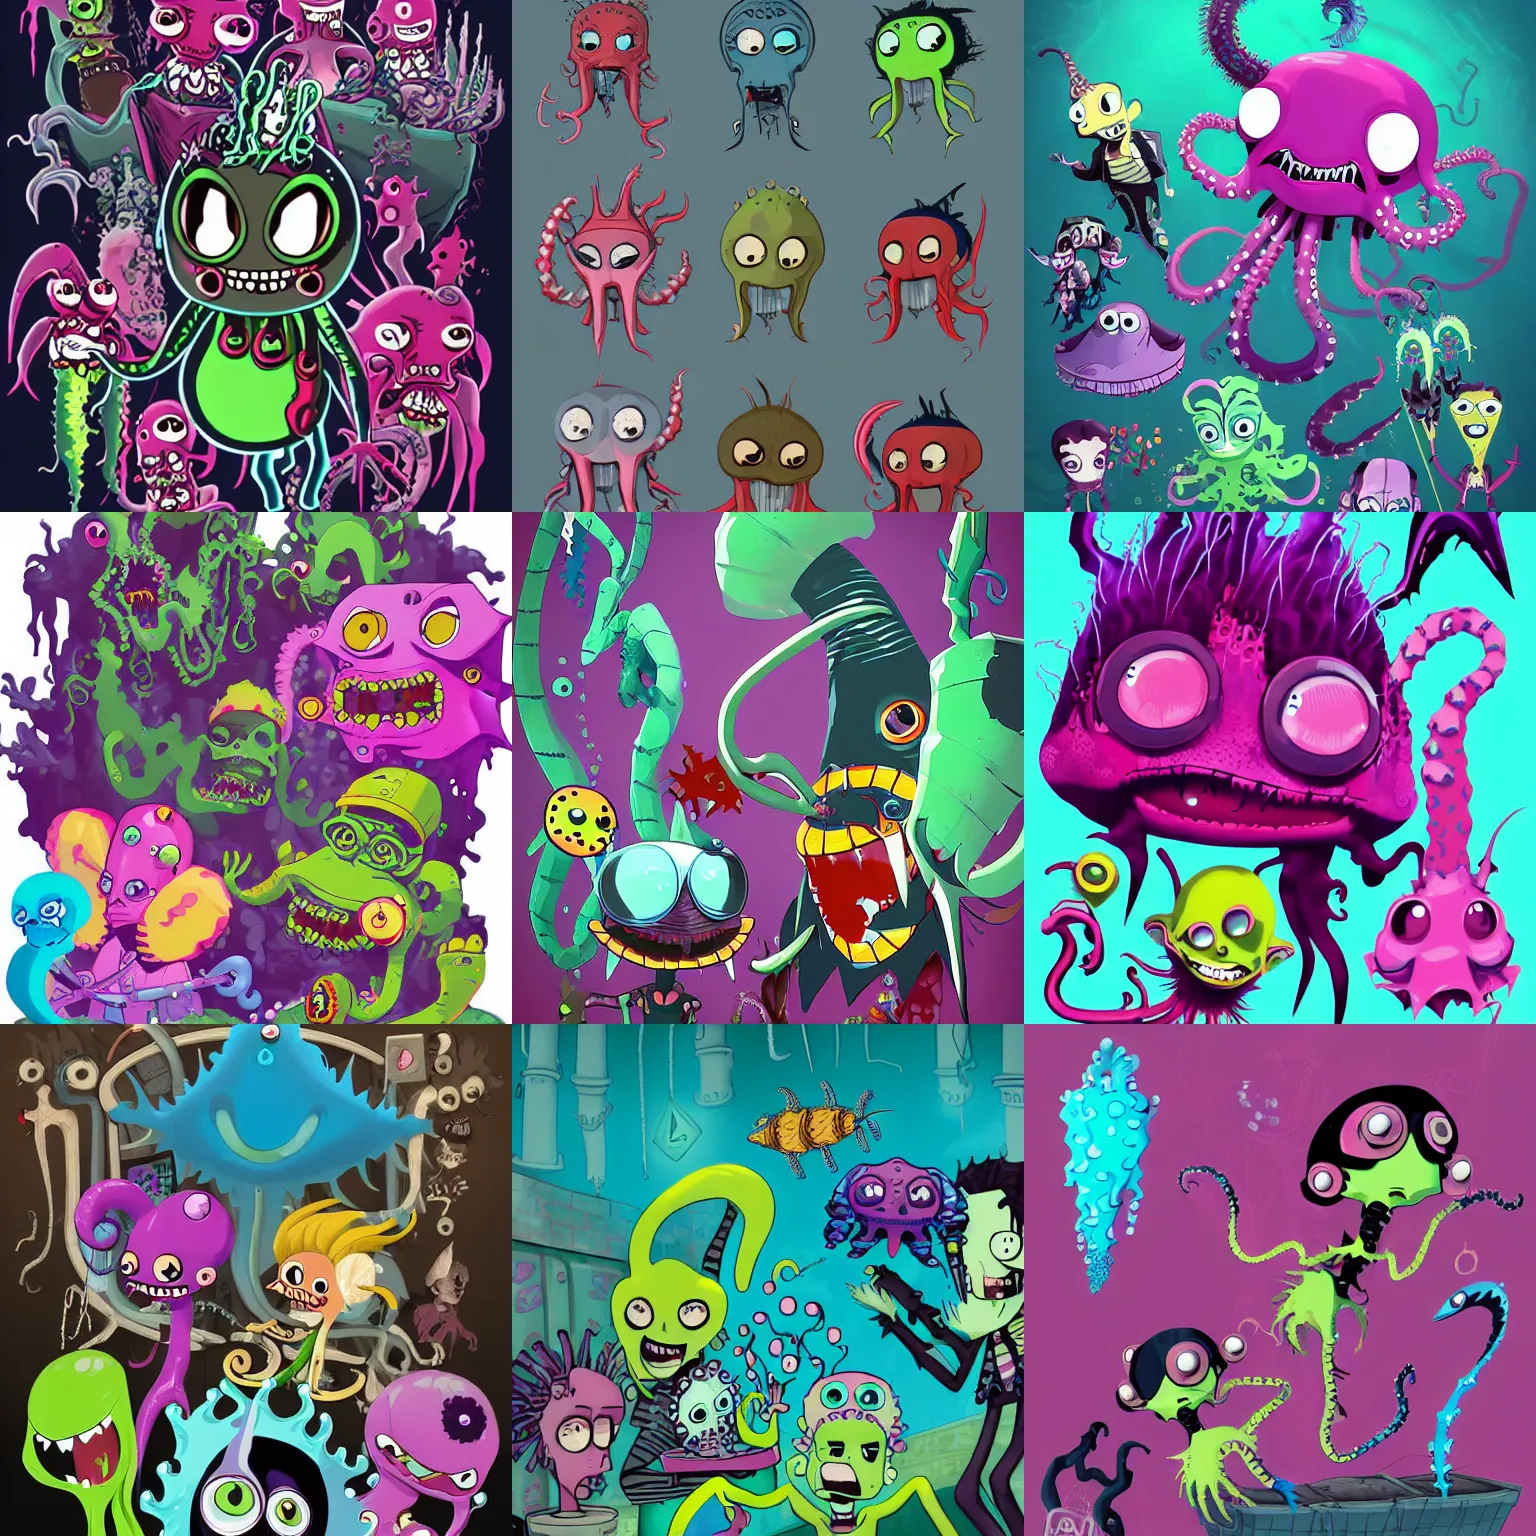 Prompt: punk rock vampiric electrifying 80s underwater party rockstar vampire octopus, angler fish, gulper eel, mantis shrimp, jellyfish and sea urchins conceptual character designs of various shapes and sizes by genndy tartakovsky and splatoon by nintendo and the psychonauts franchise by doublefine tim shafer artists for the new hotel transylvania film